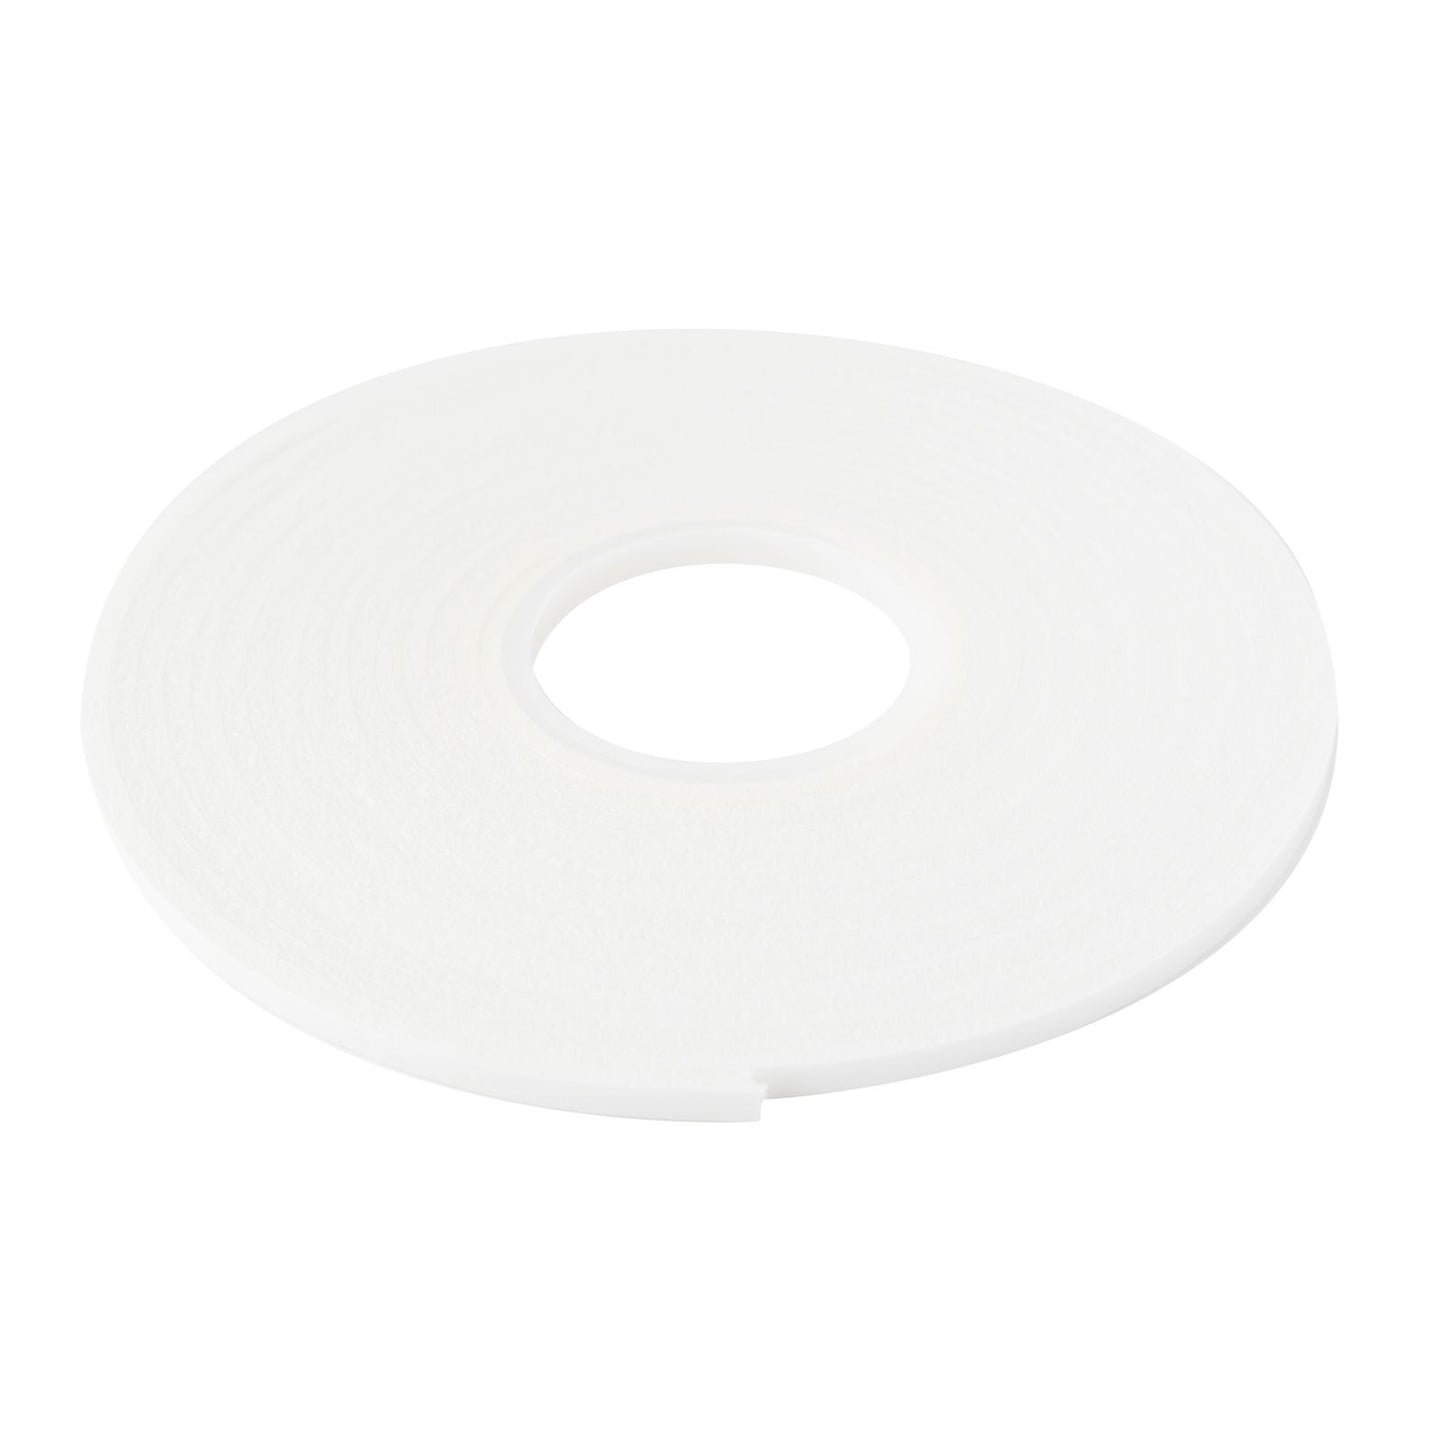 ADHESIVE - AC - STICKY THUMB - DOUBLE SIDED FOAM - WHITE - 1/8 INCH X 3.94 YARDS X 2MM